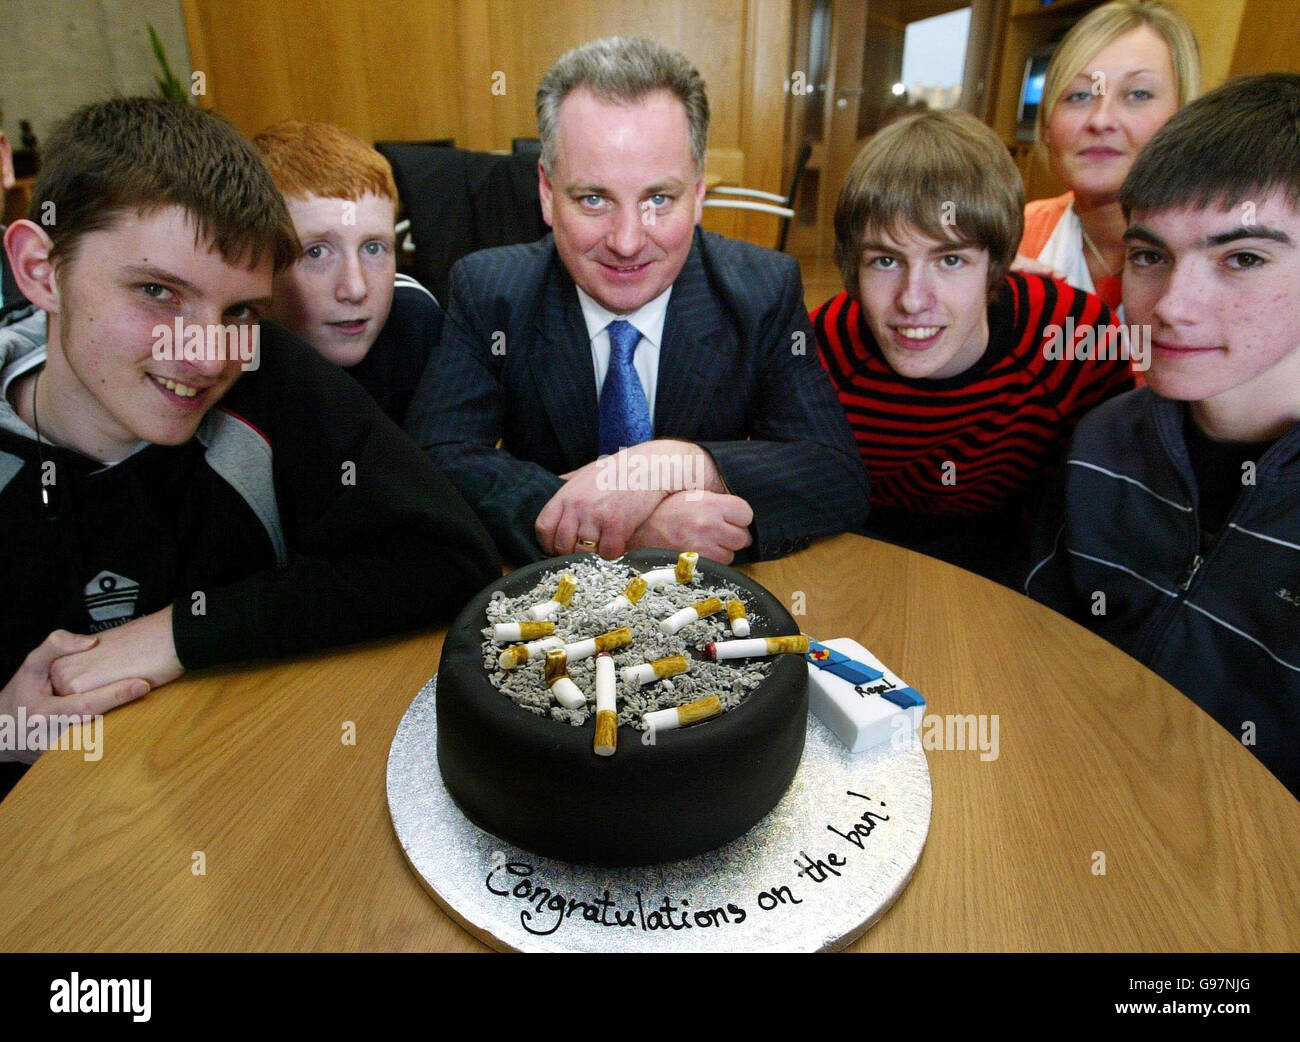 Scottish First Minister Jack McConnell (centre) is accompanied by Dumbarton Academy students (l-r); Andrew McWatt, Steven Nelson, Andrew Ferguson and Ian Green and youth worker Karen Muir (back), as they sit in front of a smoking cake at the Scottish parliament in Edinburgh, Thursday March 23, 2006. The cake was presented to the First Minister by his staff to mark Scotland's smoking ban, which starts on Saturday night. PRESS ASSOCIATION Photo. Photo credit should read: David Cheskin / PA pool. Stock Photo